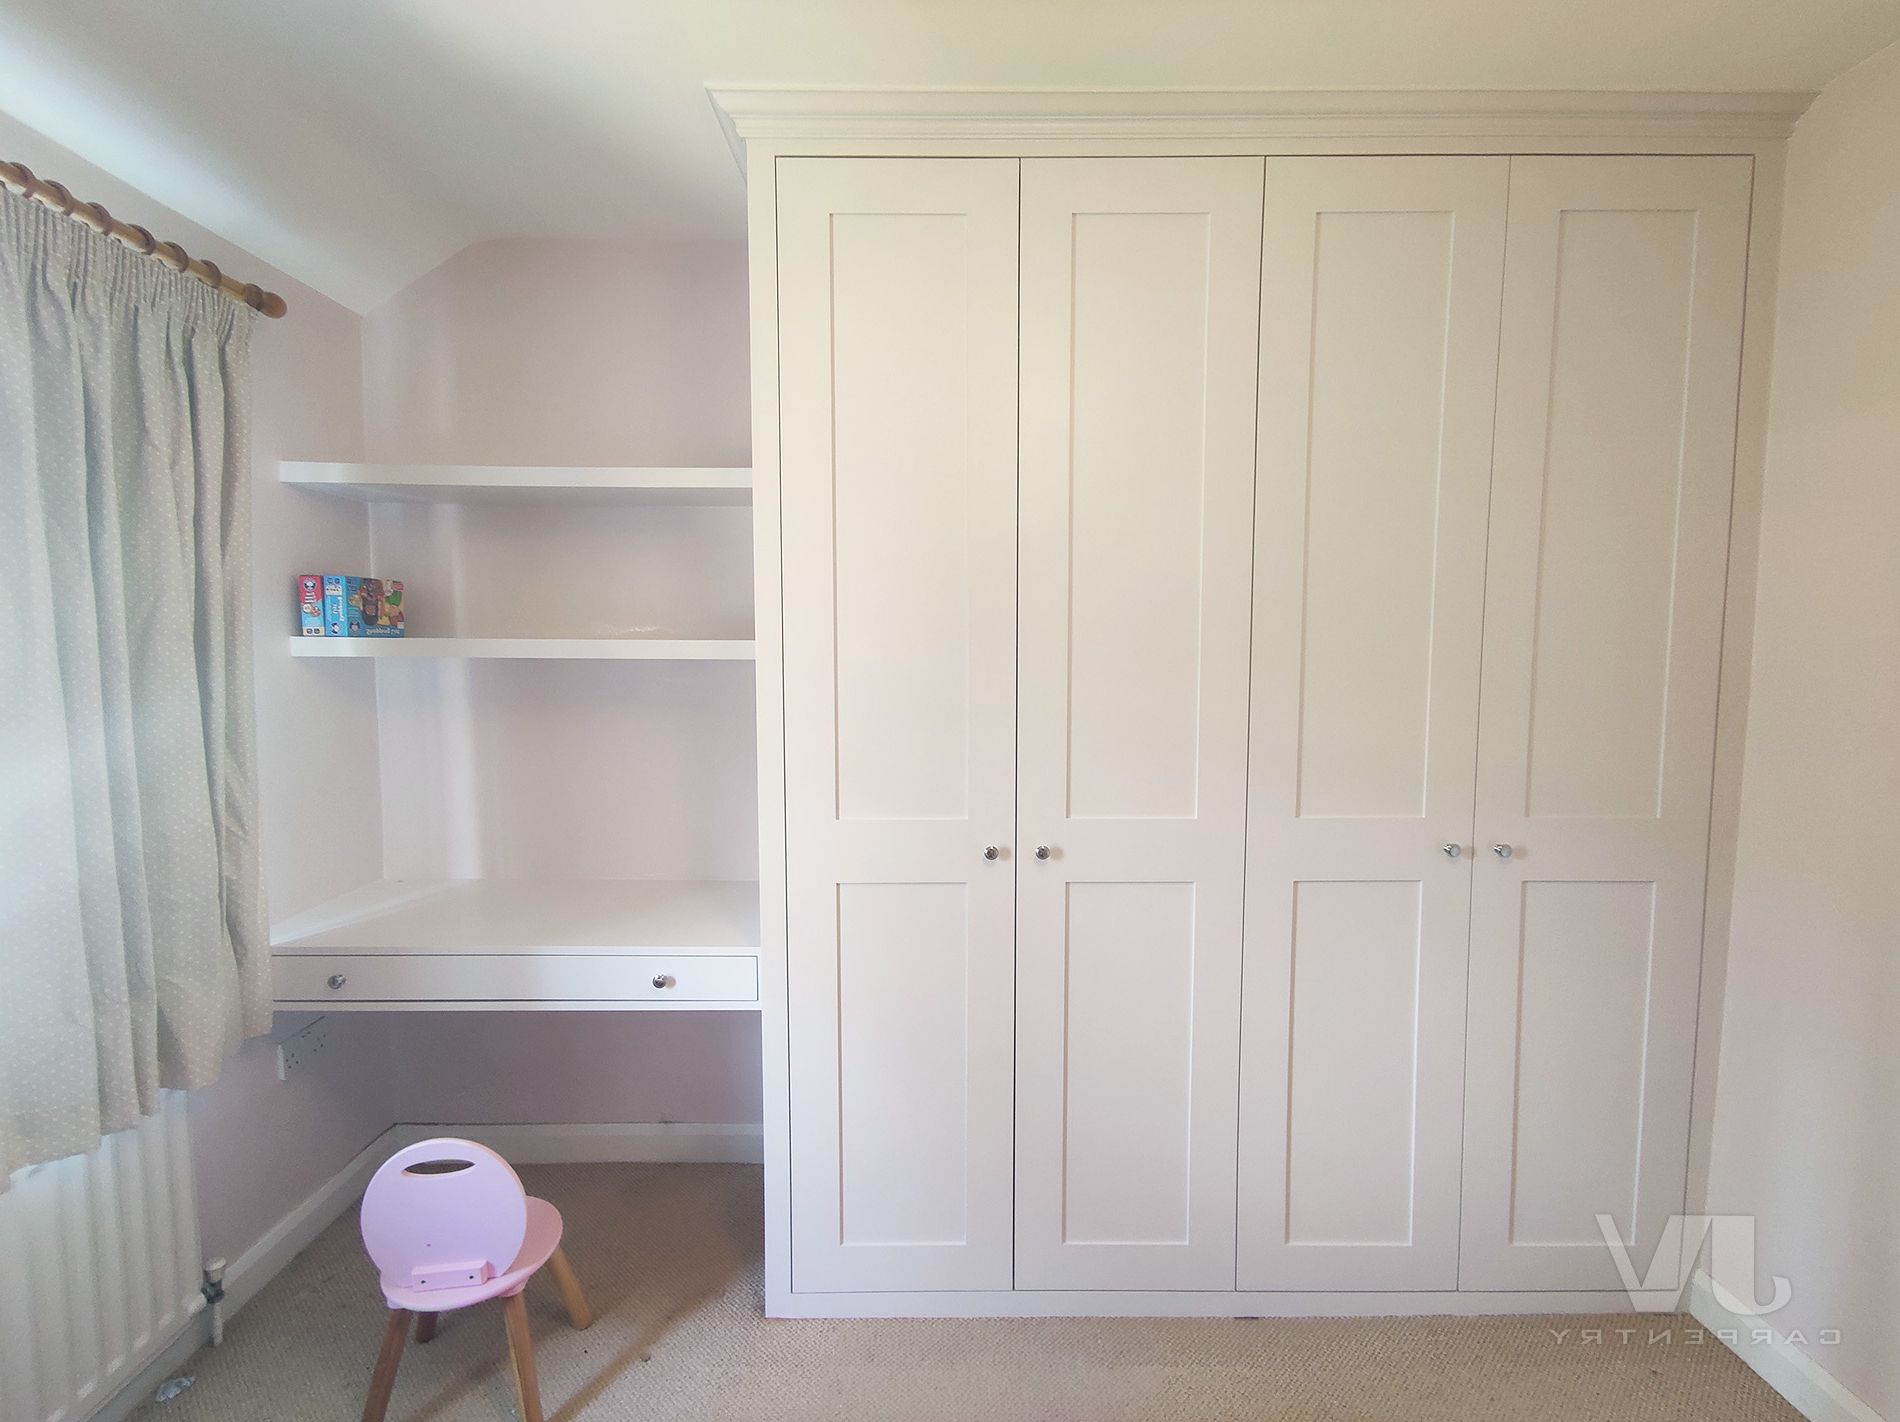 9 Fitted Wardrobes With Dressing Table Ideas | Jv Carpentry In Wardrobes And Dressing Tables (Gallery 3 of 20)